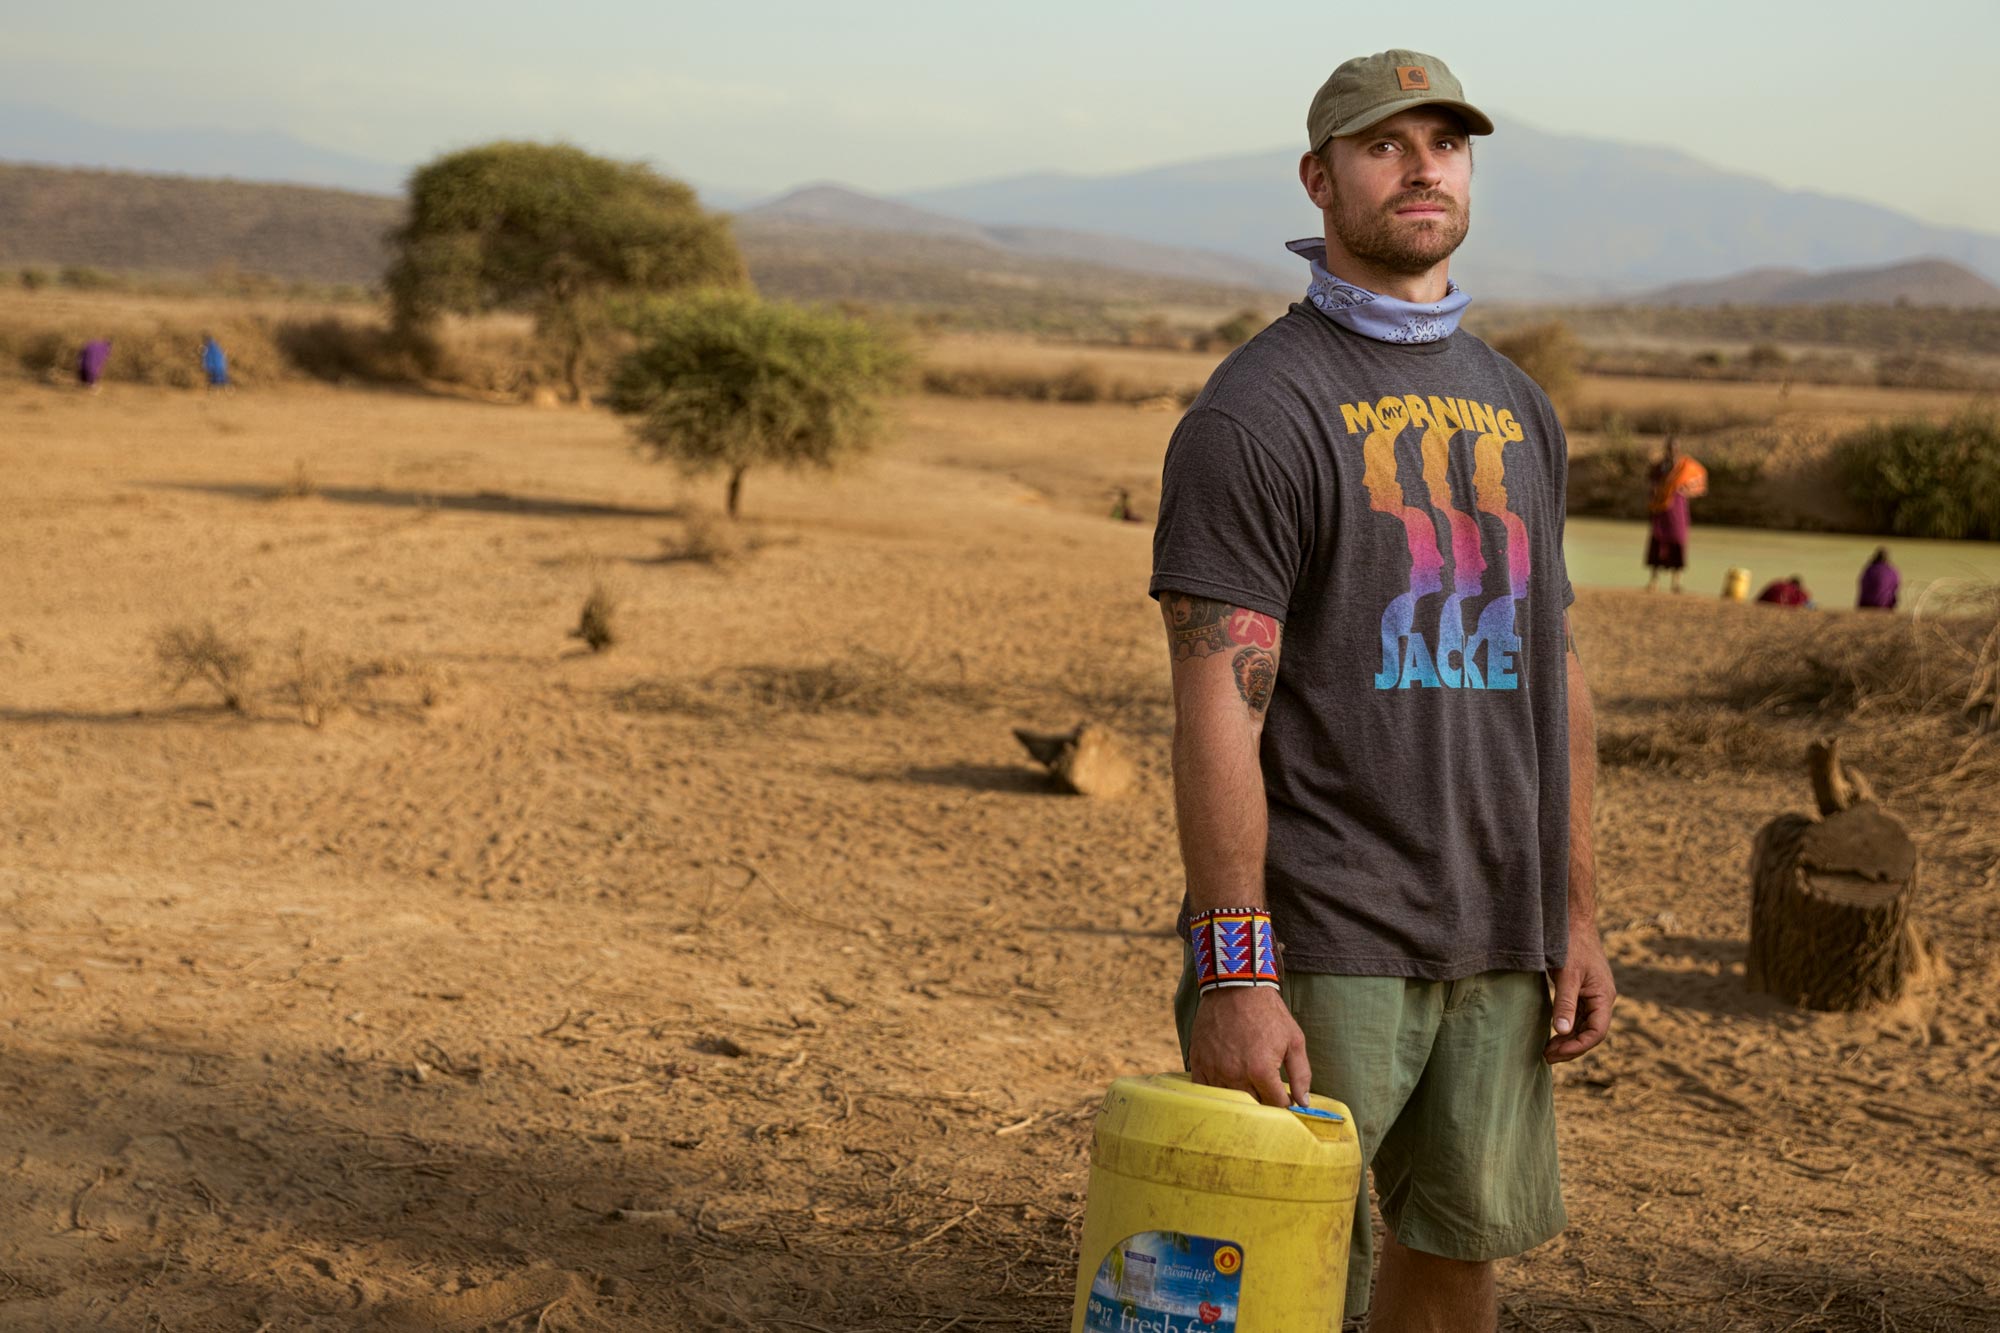 Chris Long stands in the Africa desert near a watering hole carrying a yellow bucket to fill up with water